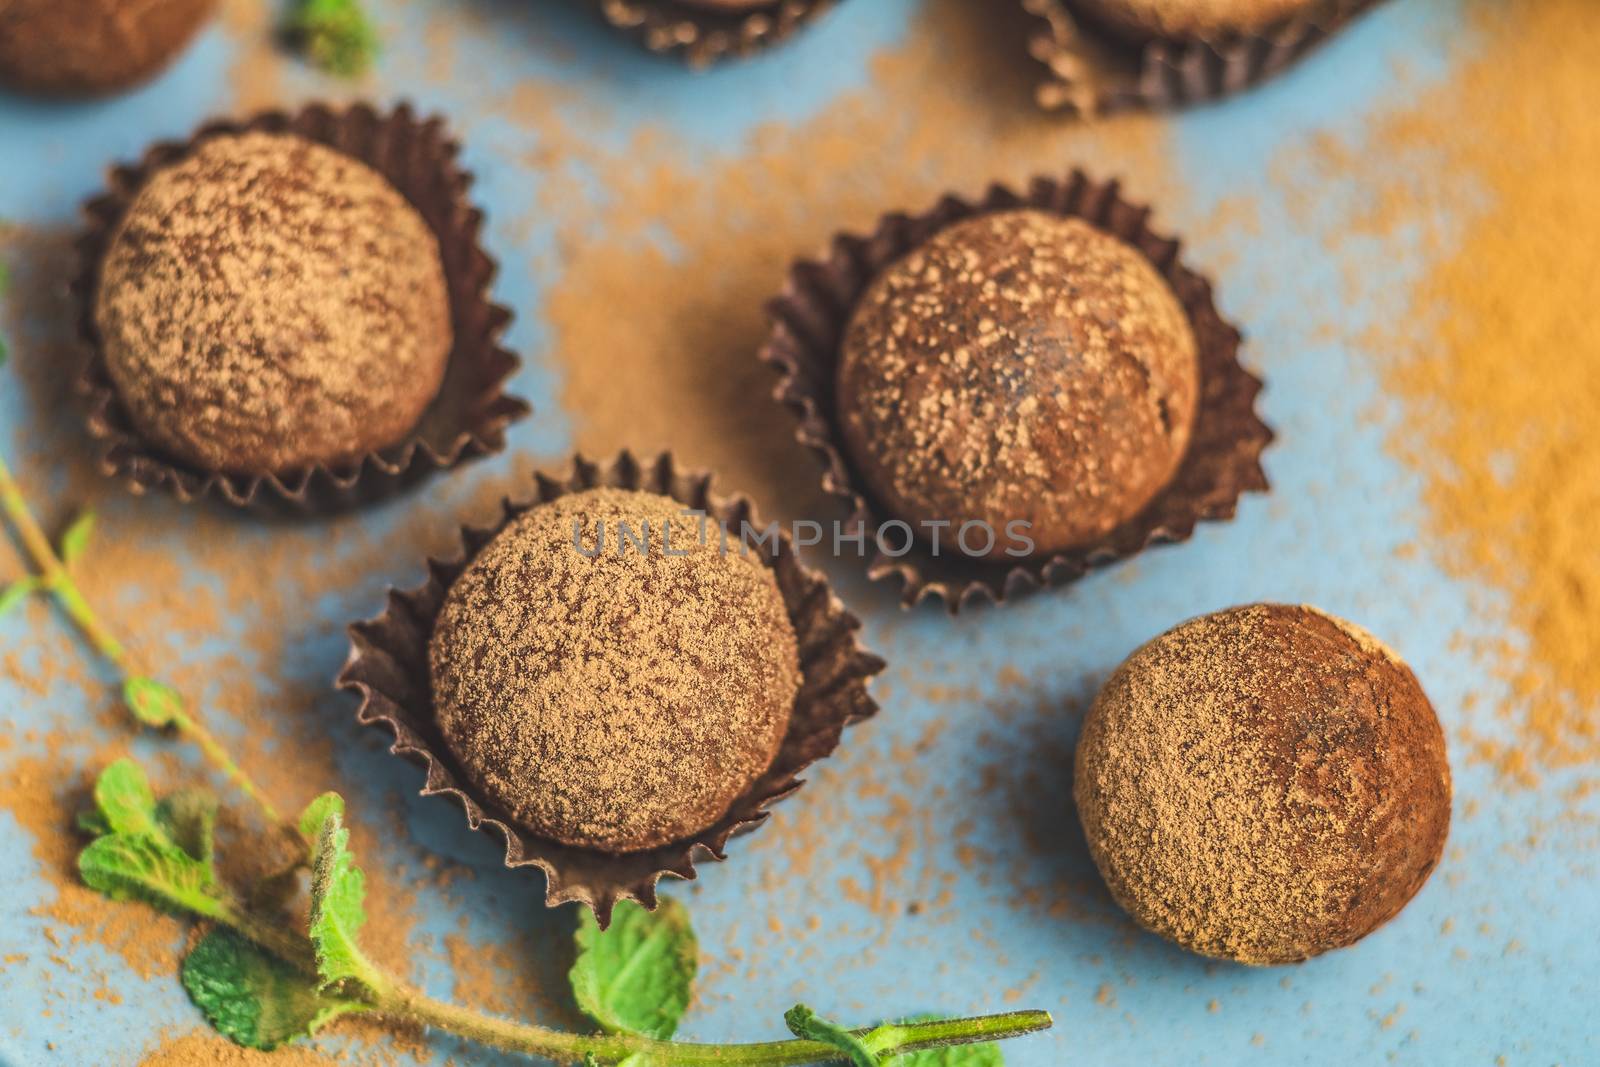 Cocoa balls, handmade chocolate balls cakes in a blue tray, sprinkled with cocoa powder, fresh mint and thyme on dark blue concrete surface background. Close up, copy space, shallow depth of the field